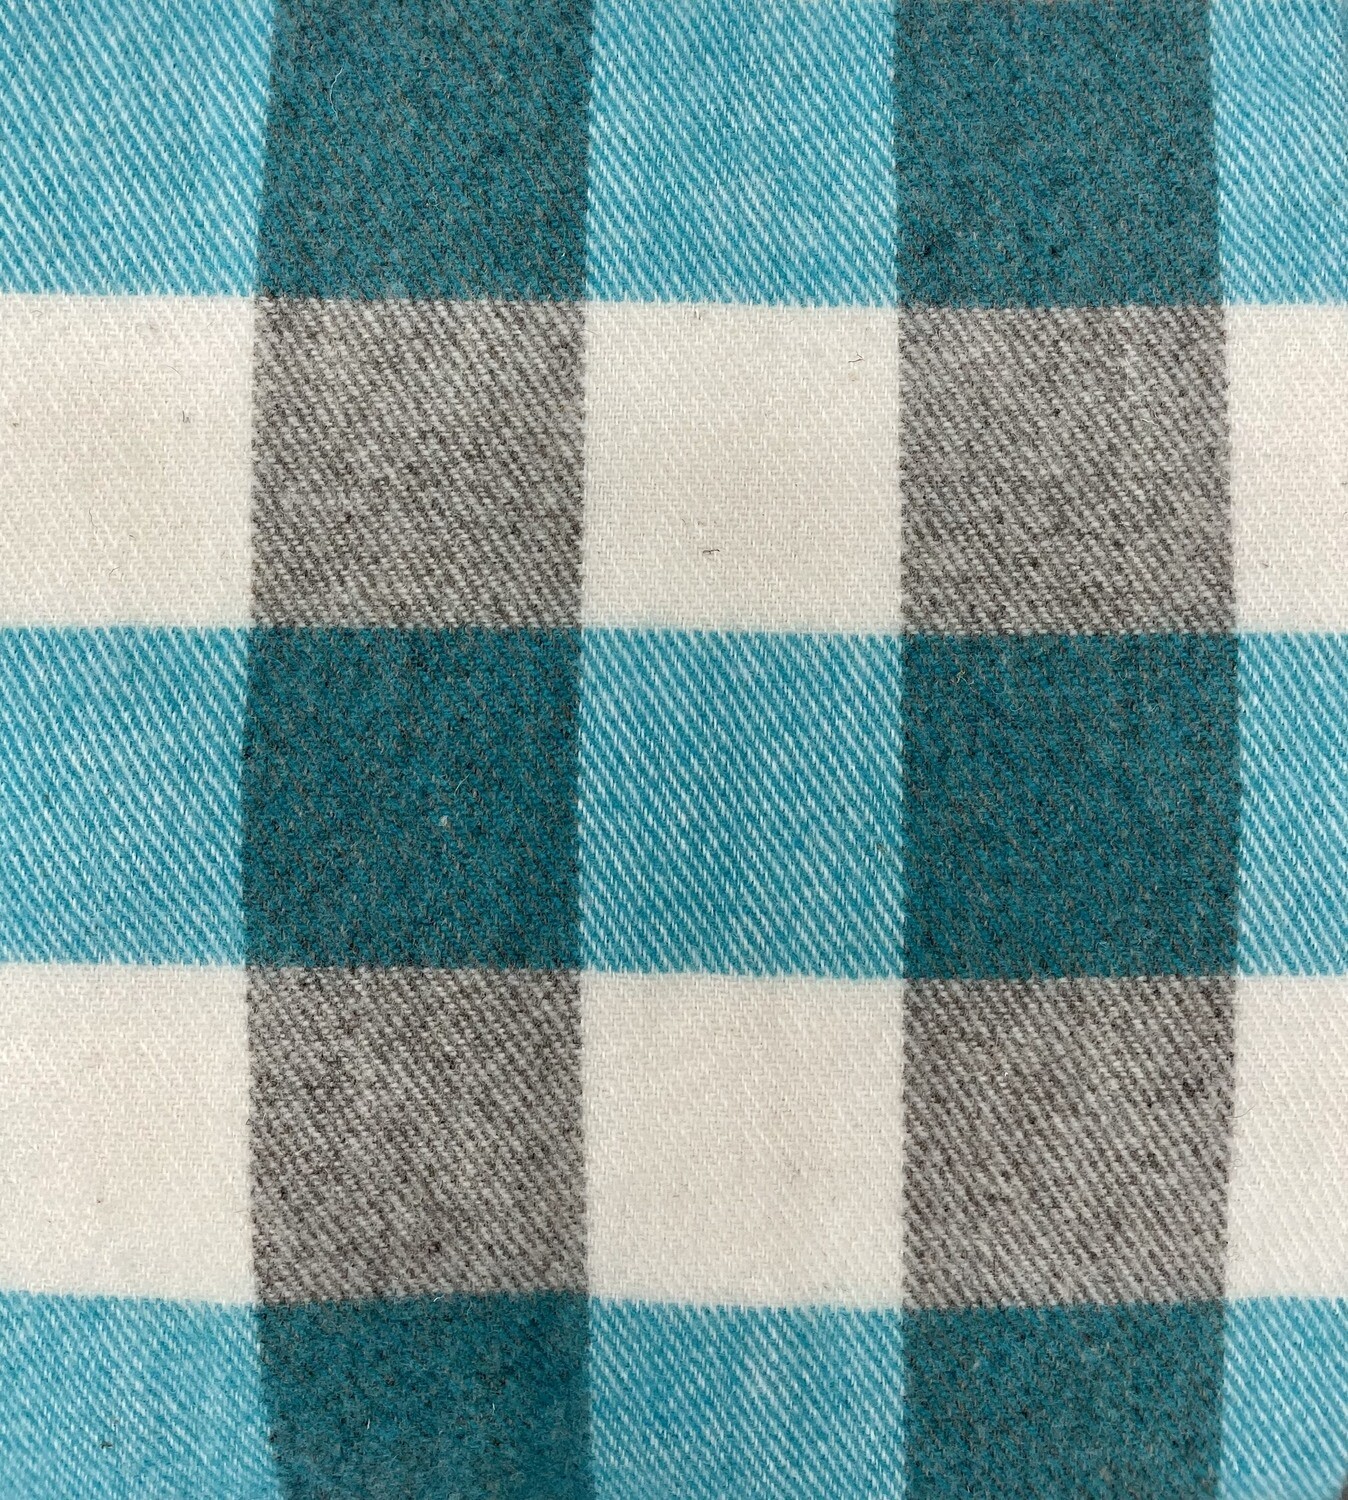 Turquoise with Natural White MacAusland's Throw Blanket